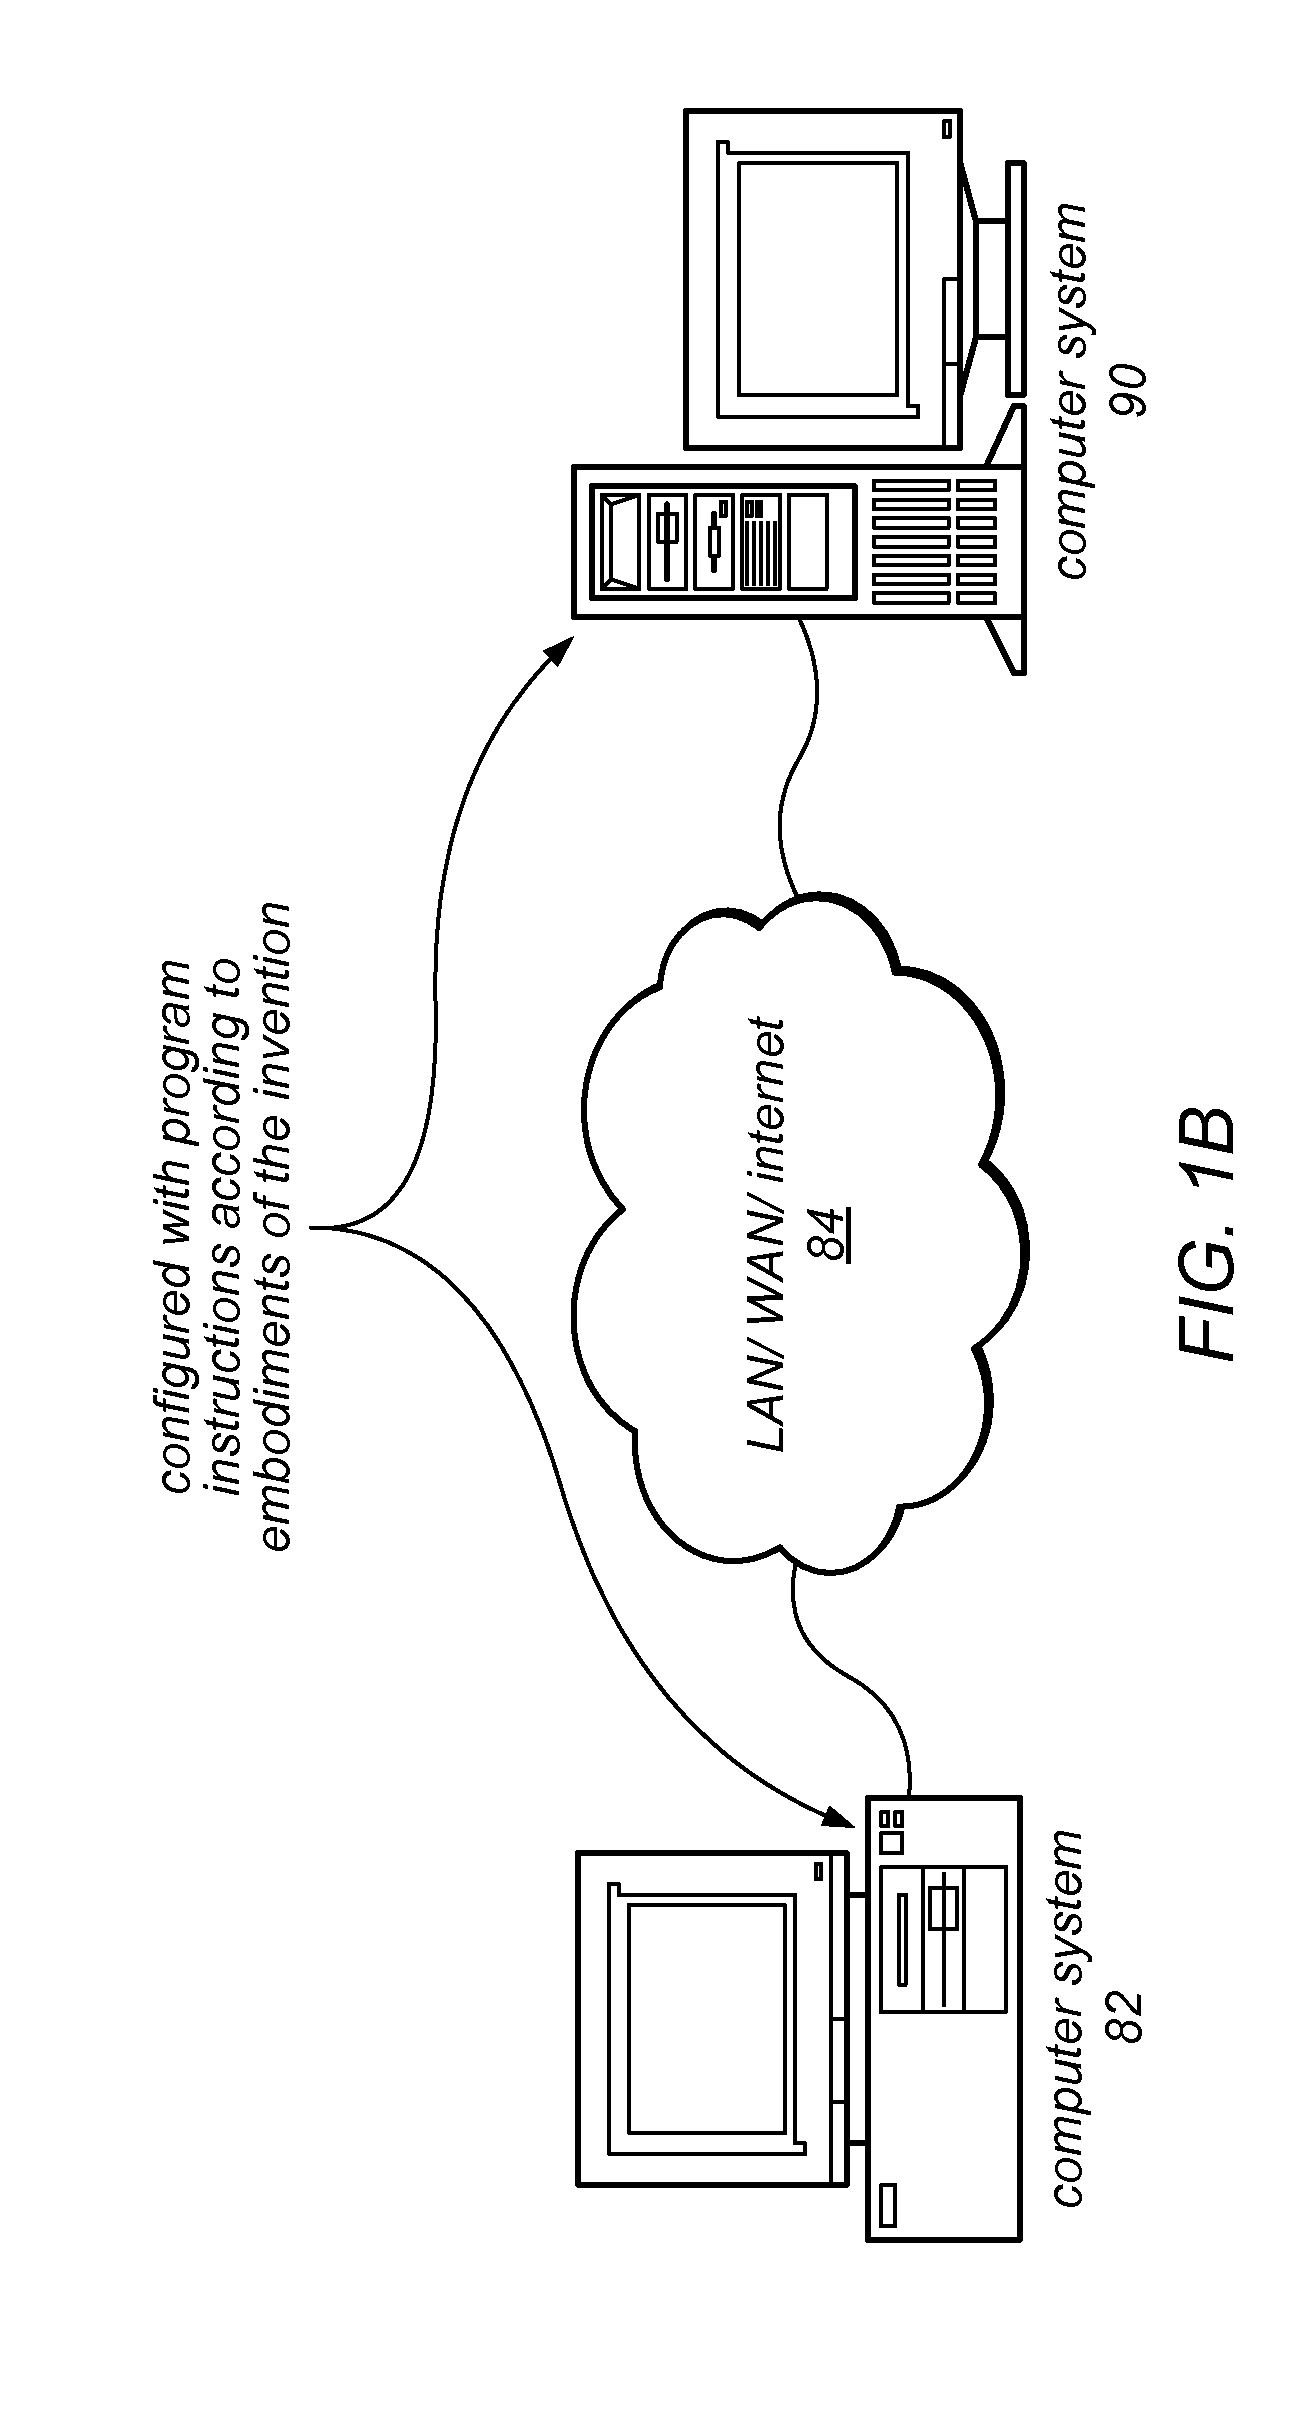 Graphical Indicator which Specifies Parallelization of Iterative Program Code in a Graphical Data Flow Program